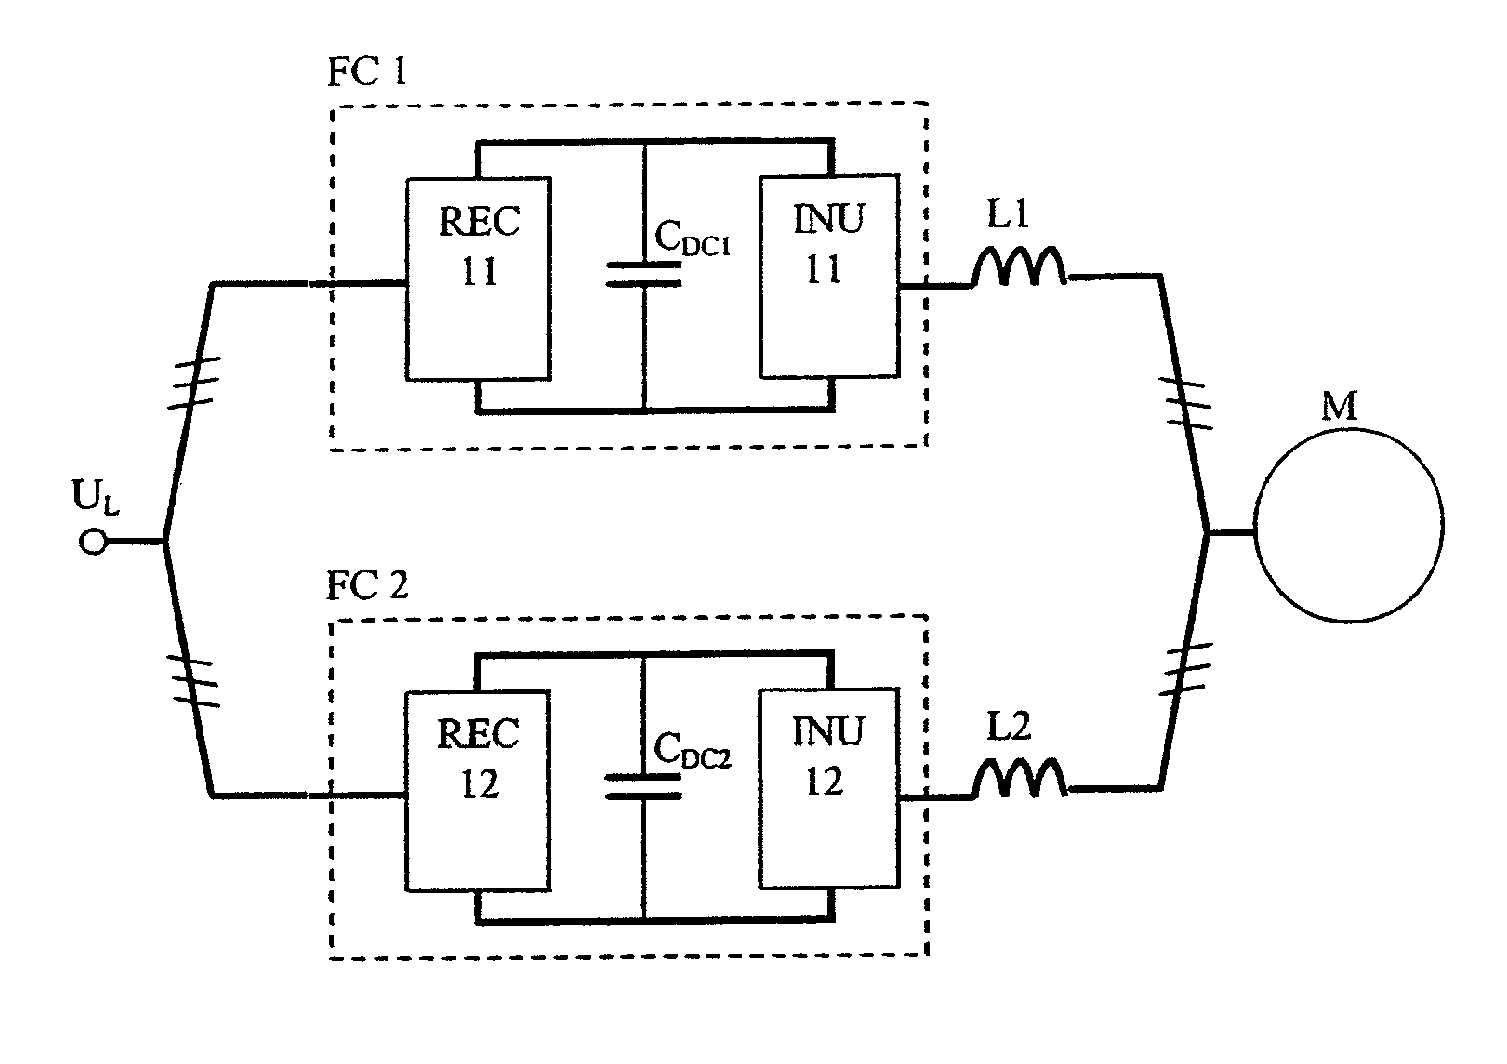 Parallel connection of inverters